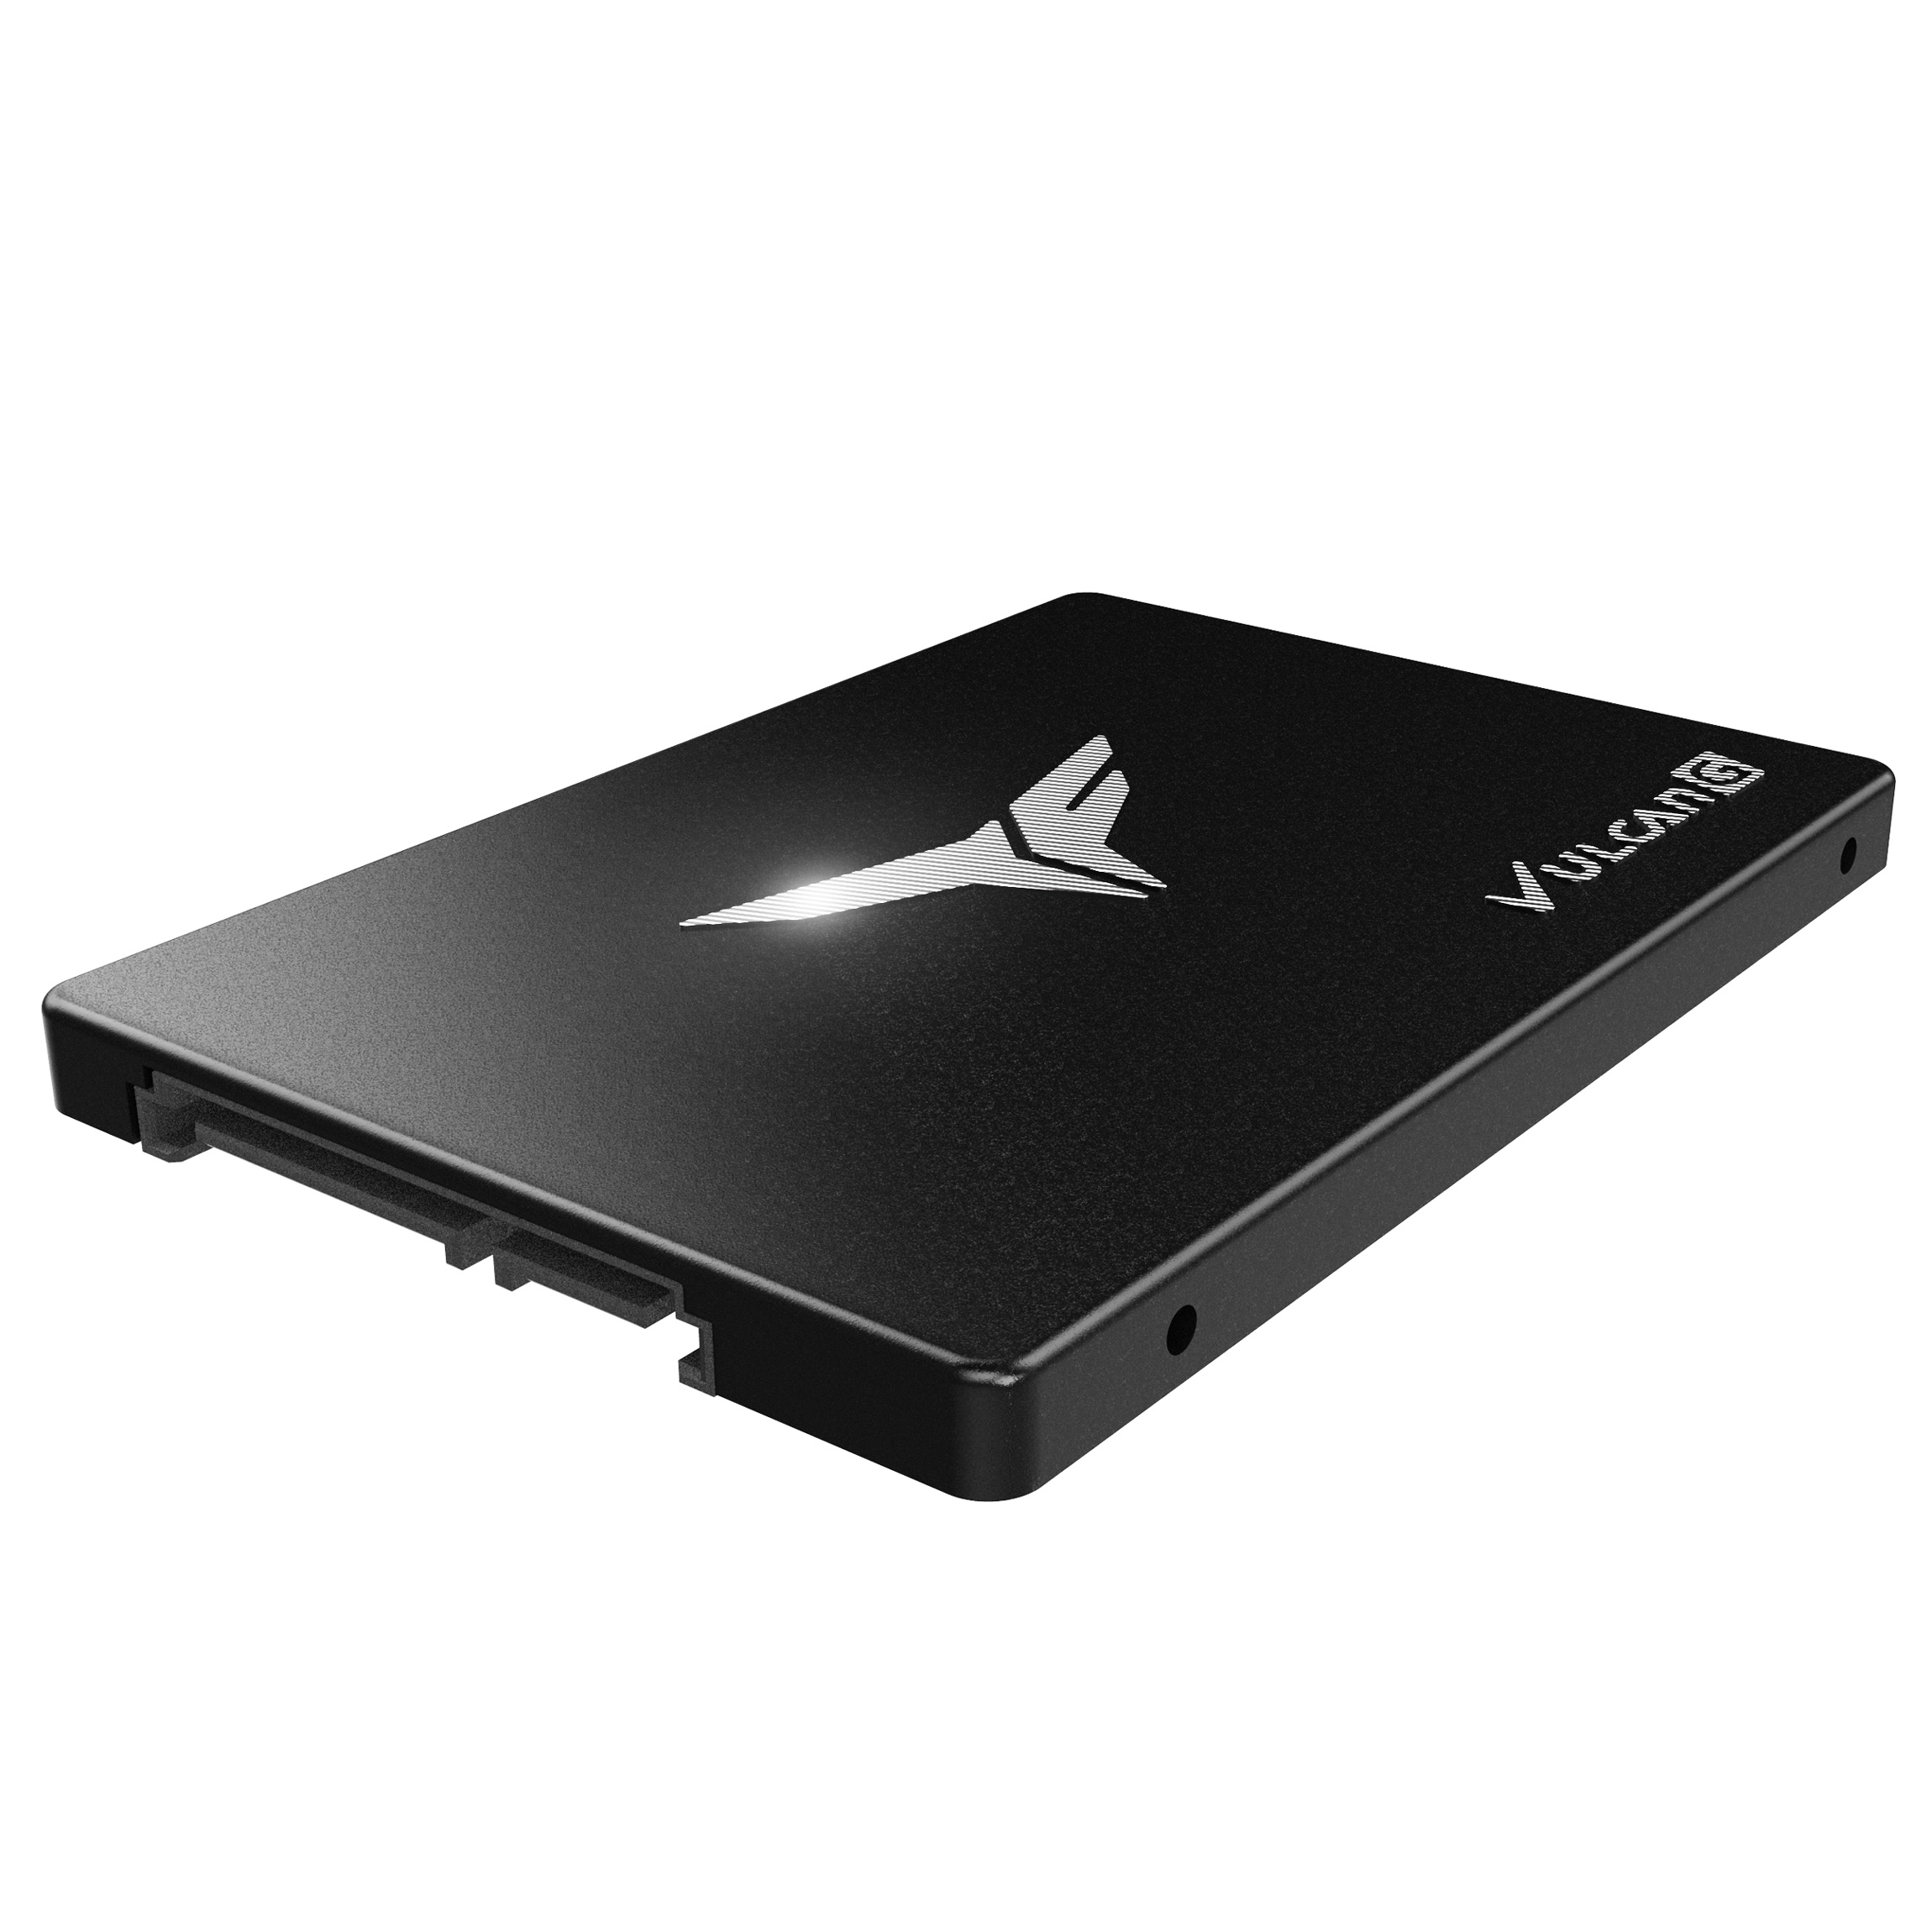 Team Group - TeamGroup 512GB Vulcan G SSD 2.5" SATA 6Gbps 3D NAND Solid State Drive